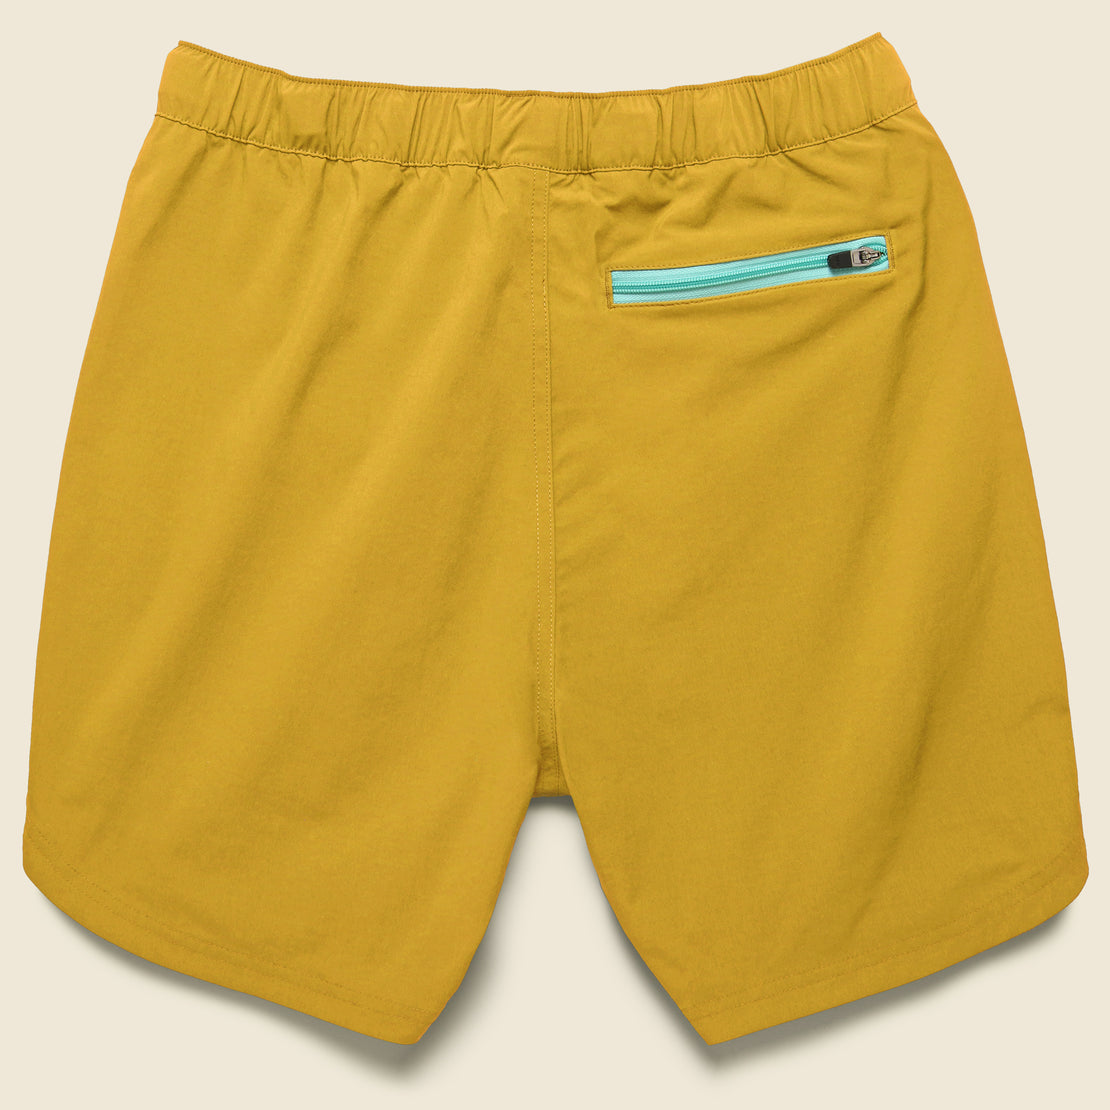 River Shorts - Mustard - Topo Designs - STAG Provisions - Shorts - Solid